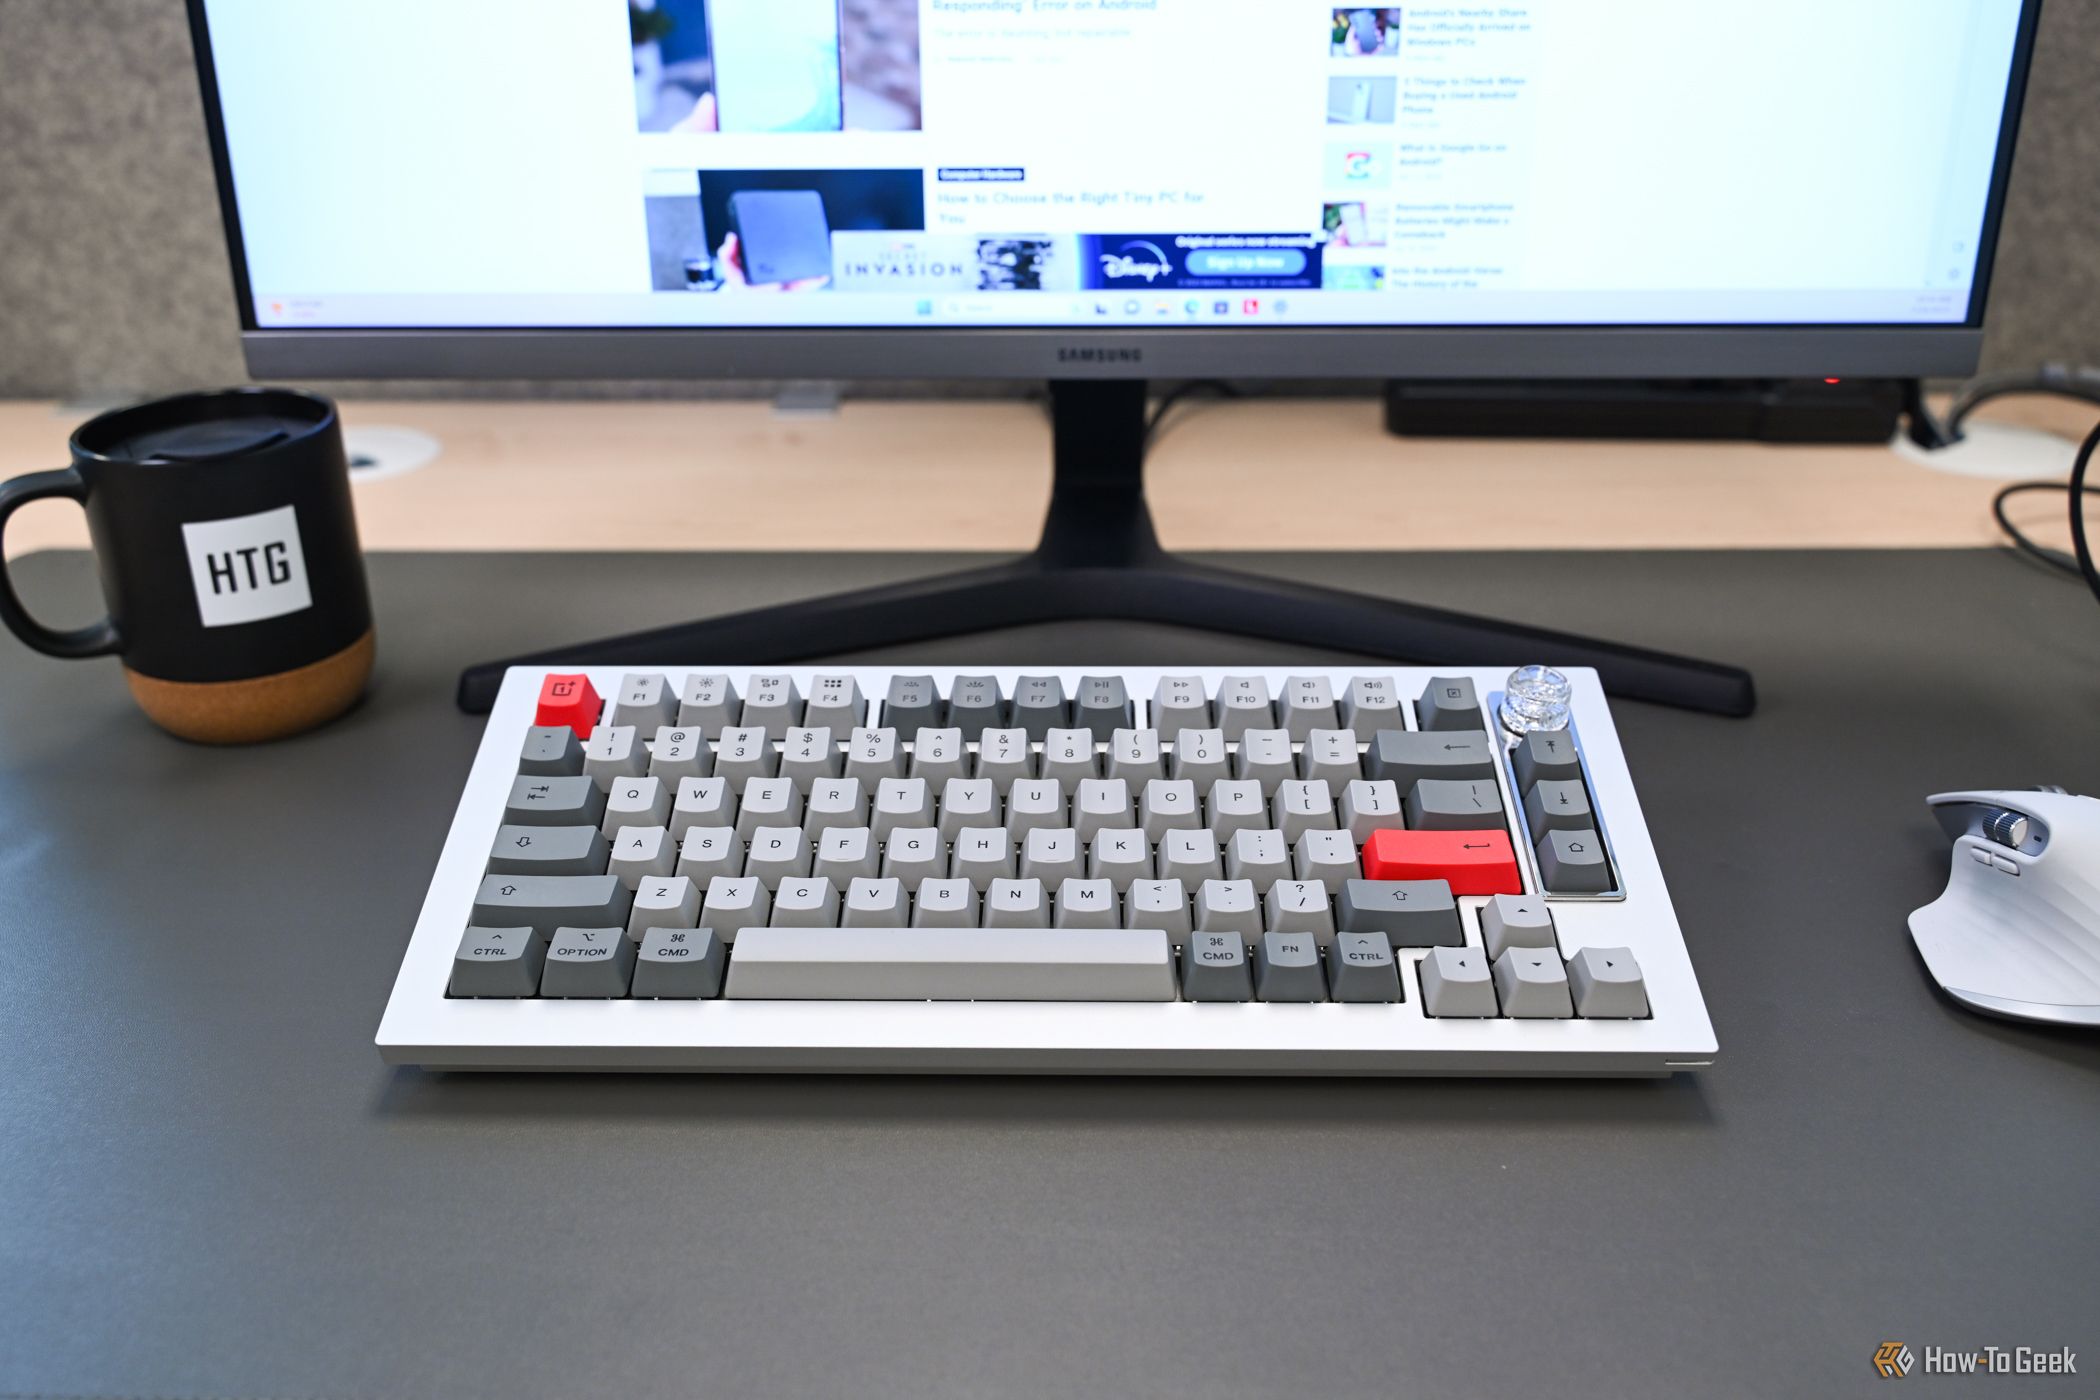 Showing OnePlus Keyboard 81 Pro on a desk in front of a monitor